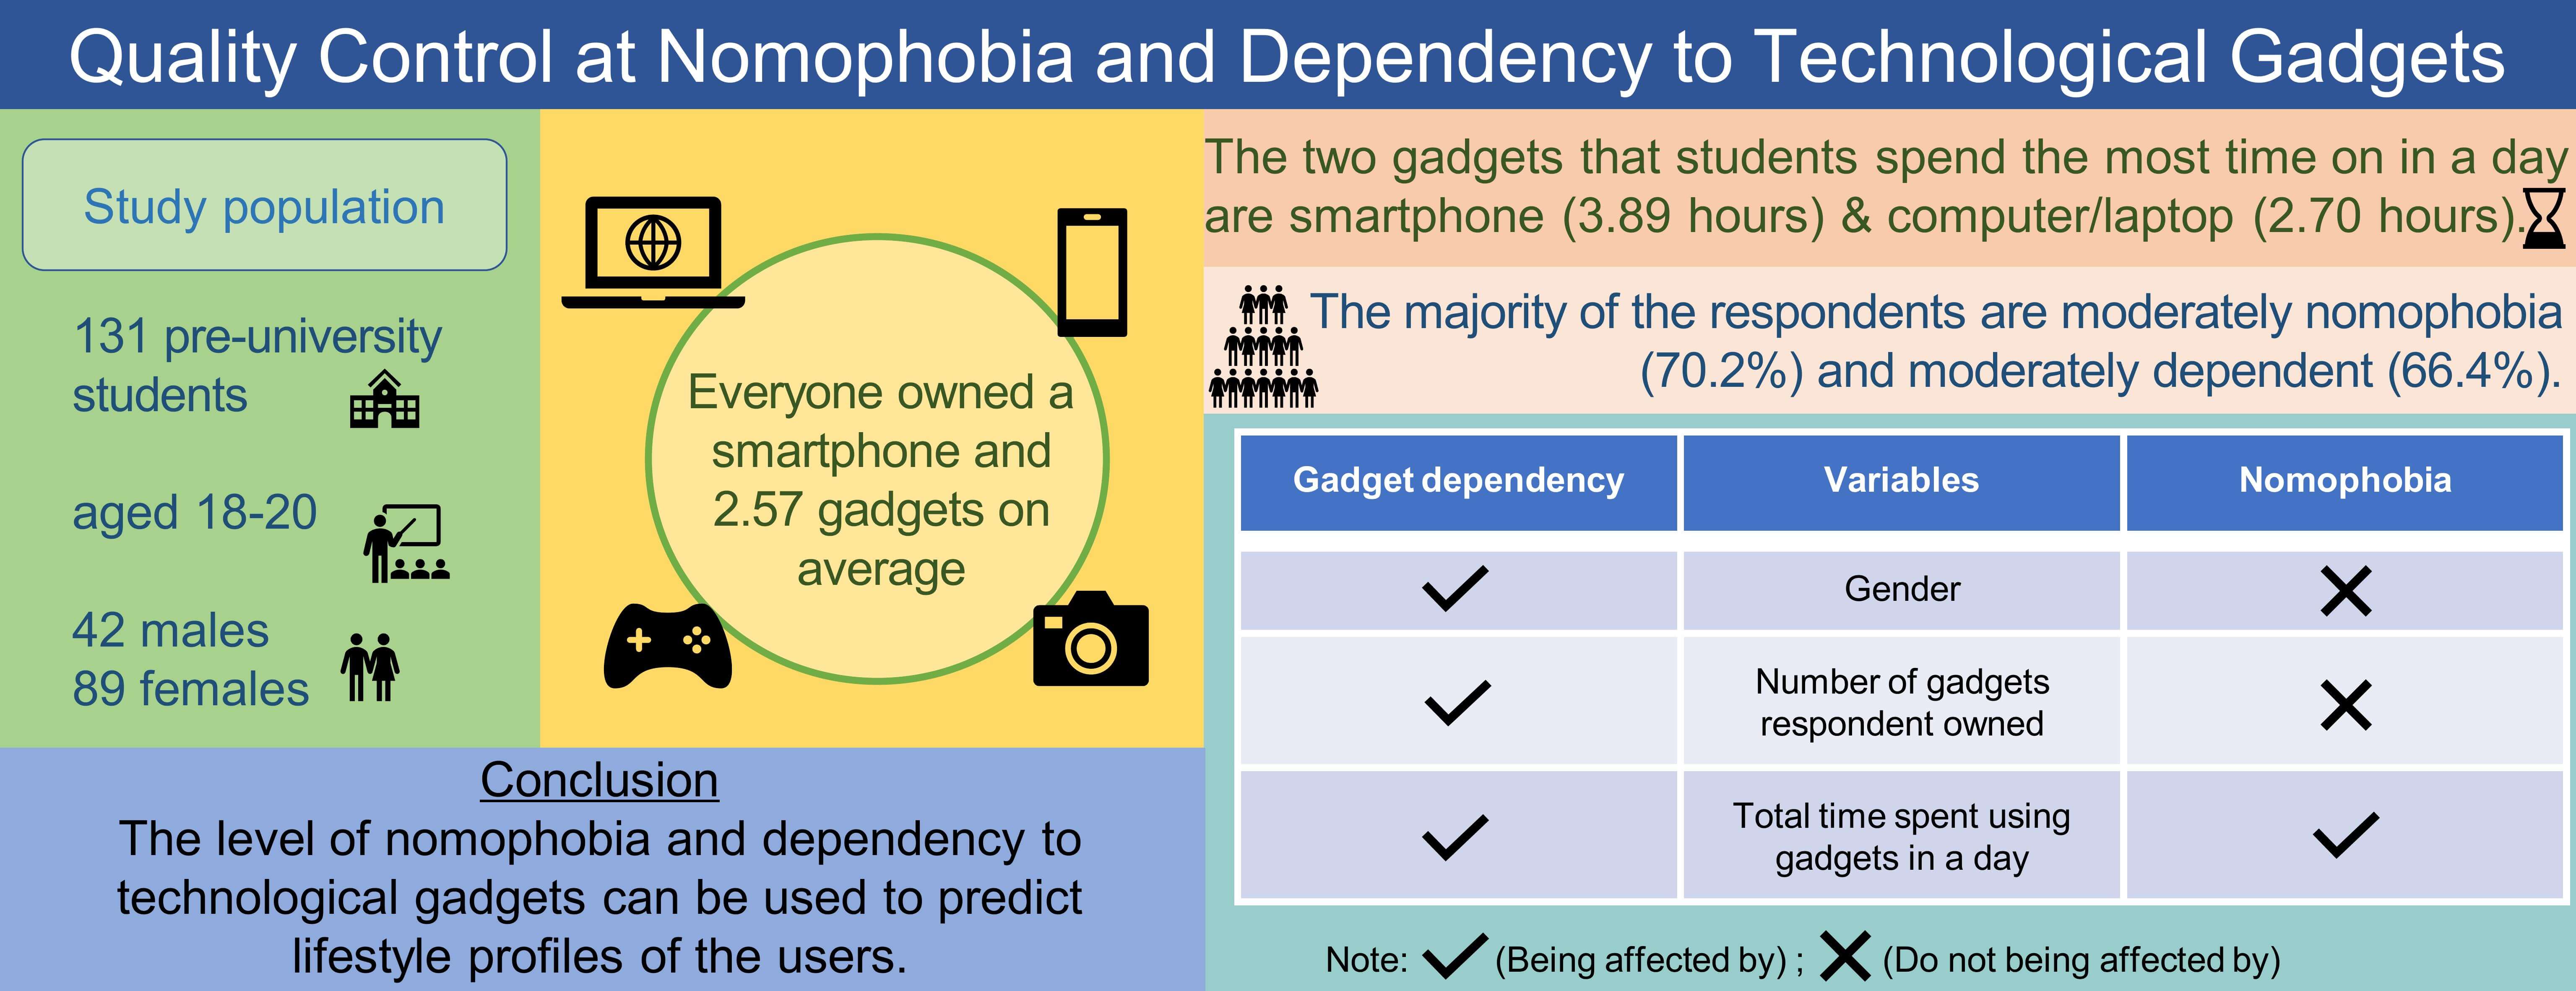 Quality Control at Nomophobia and Dependency to Technological Gadgets